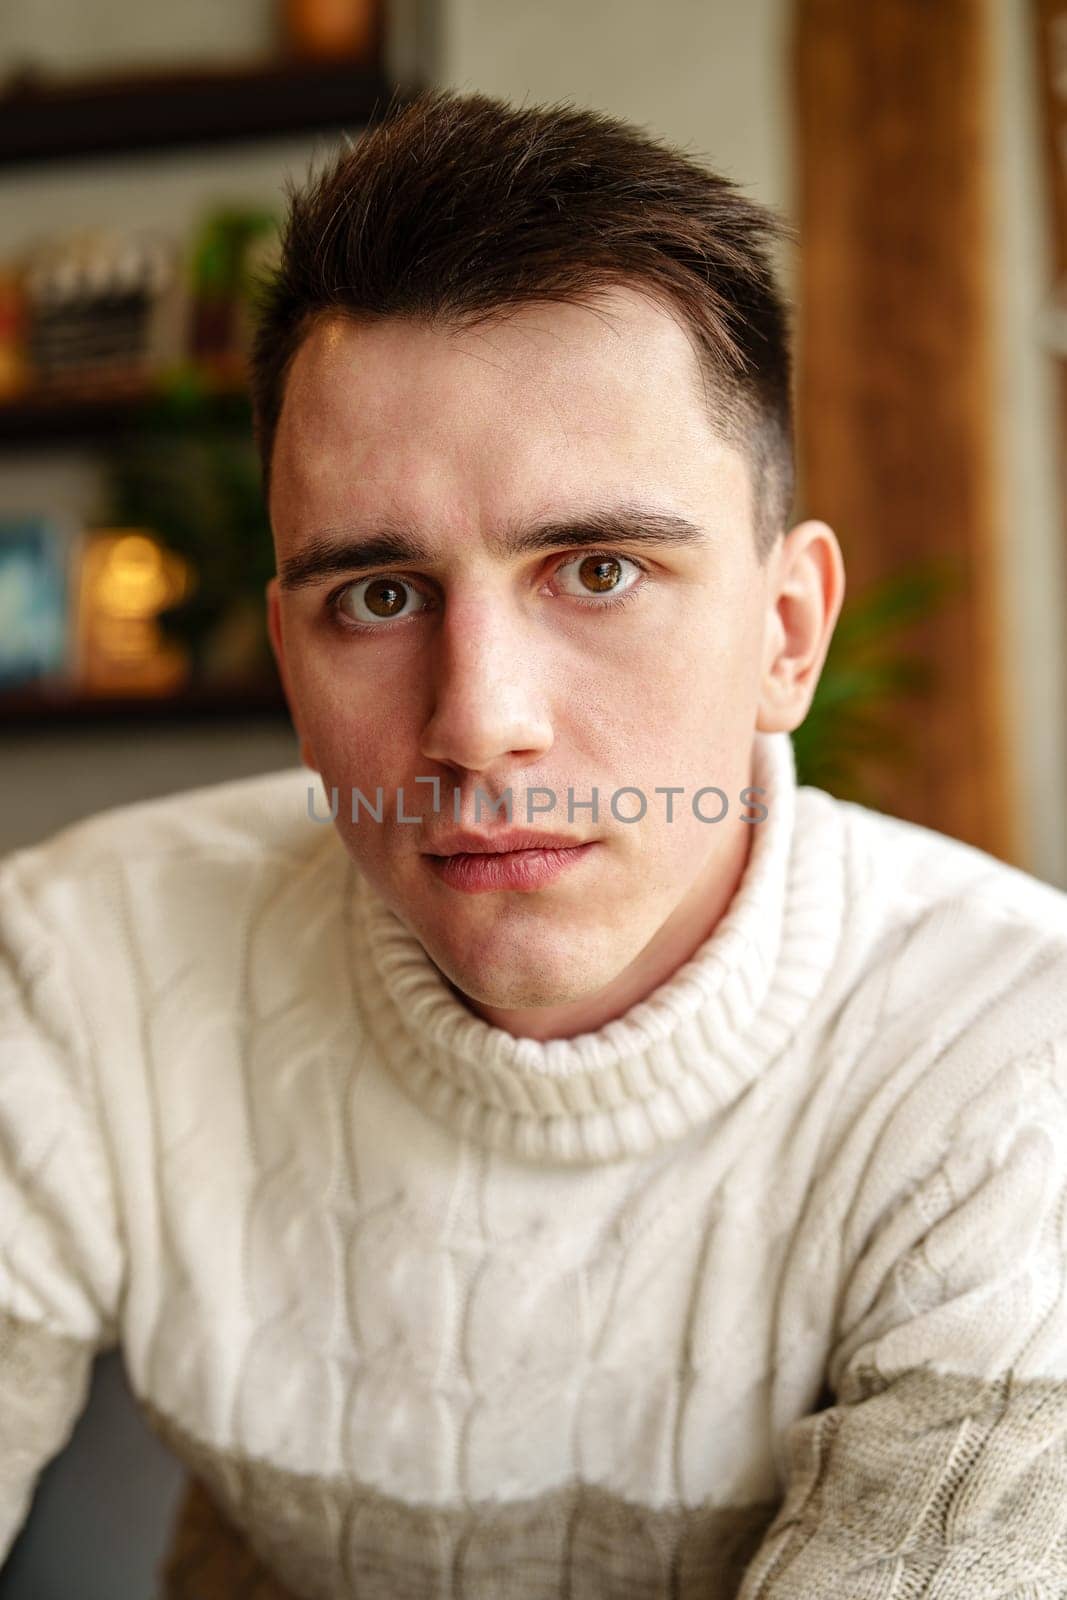 Man in White Sweater Looking at Camera by Fabrikasimf